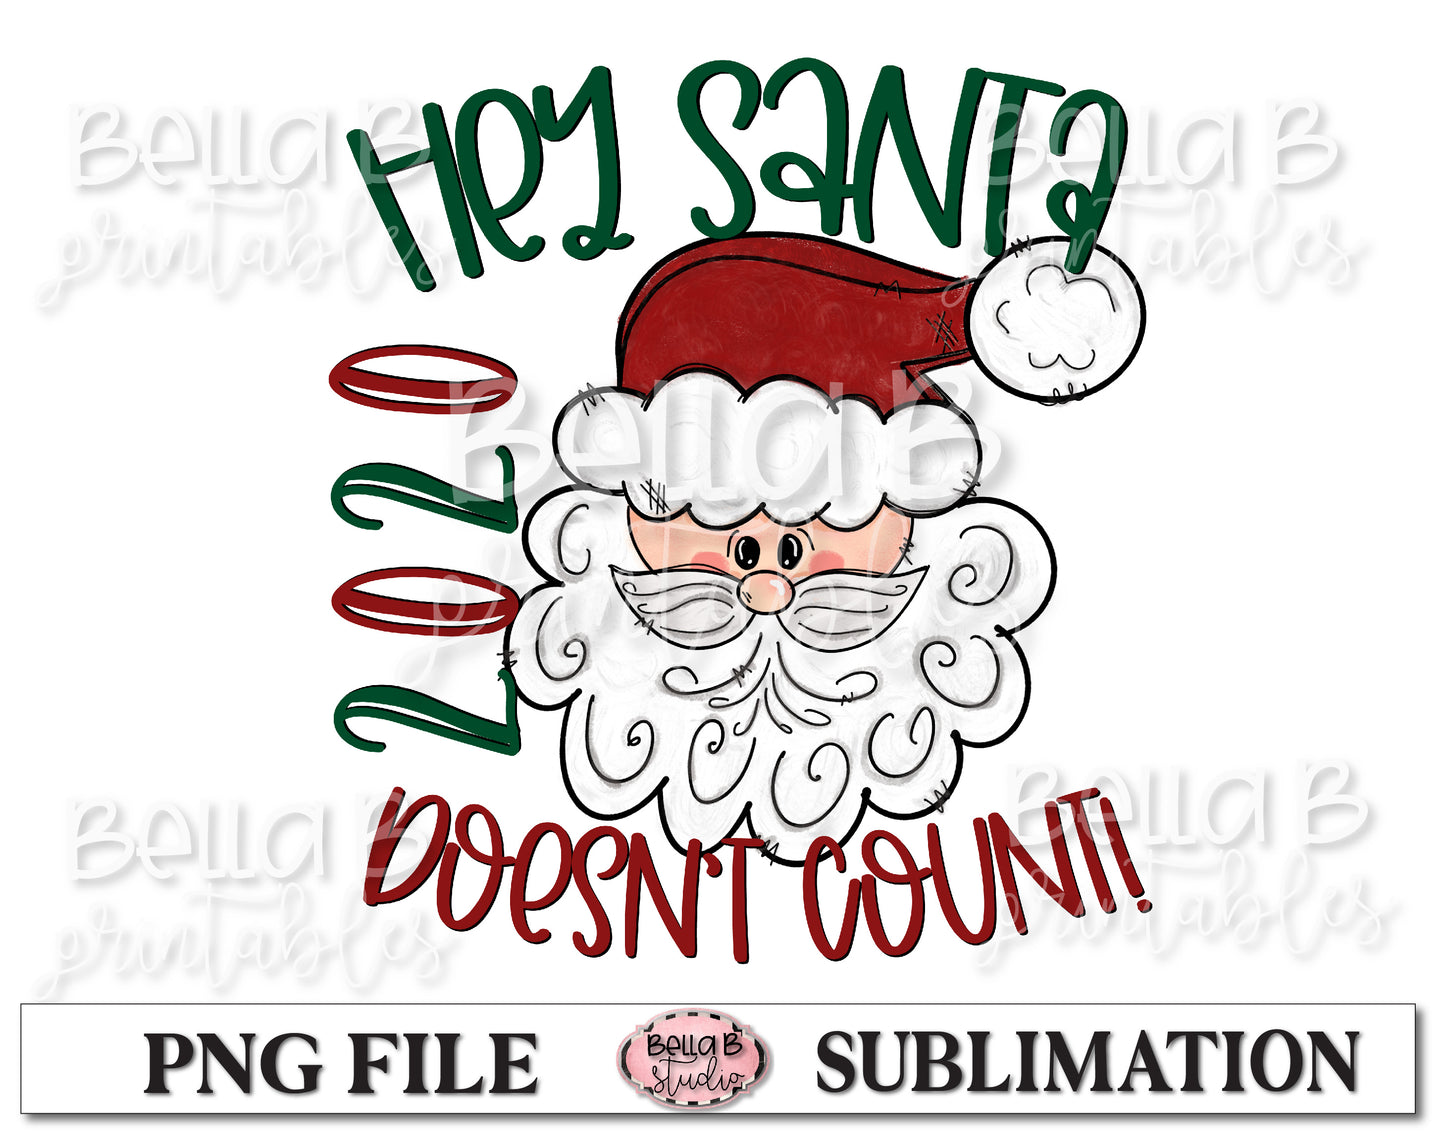 Hey Santa 2020 Doesn't Count Sublimation Design